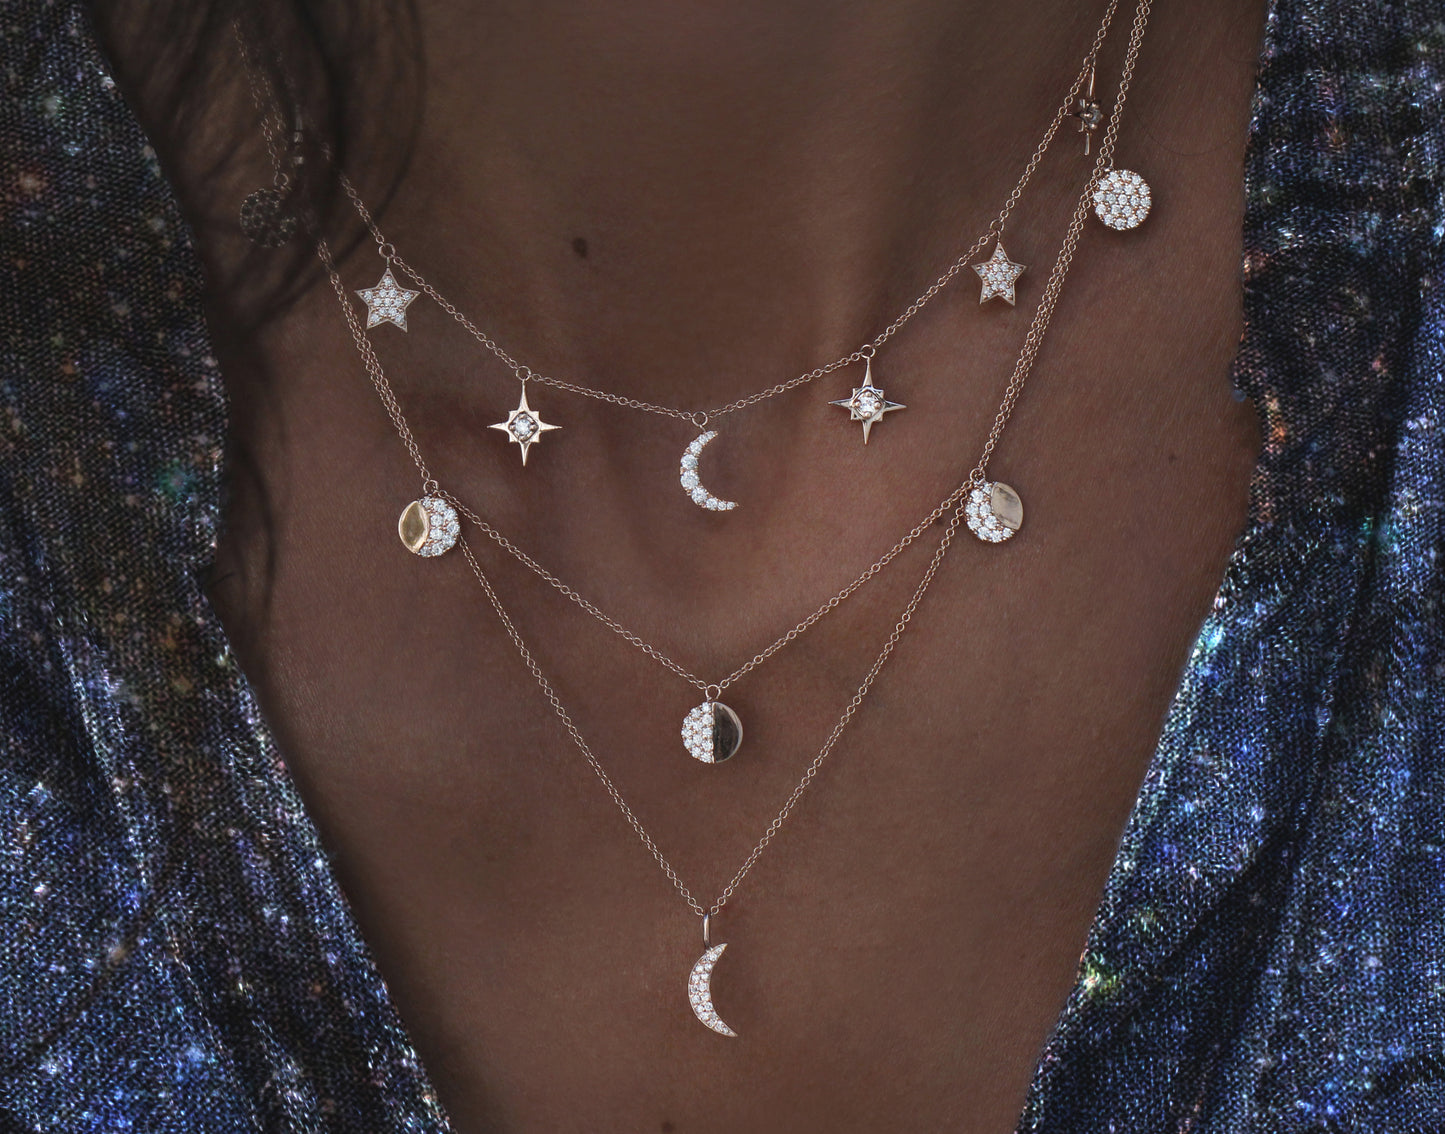 14kt gold and diamond Moon Phase necklace - Luna Skye